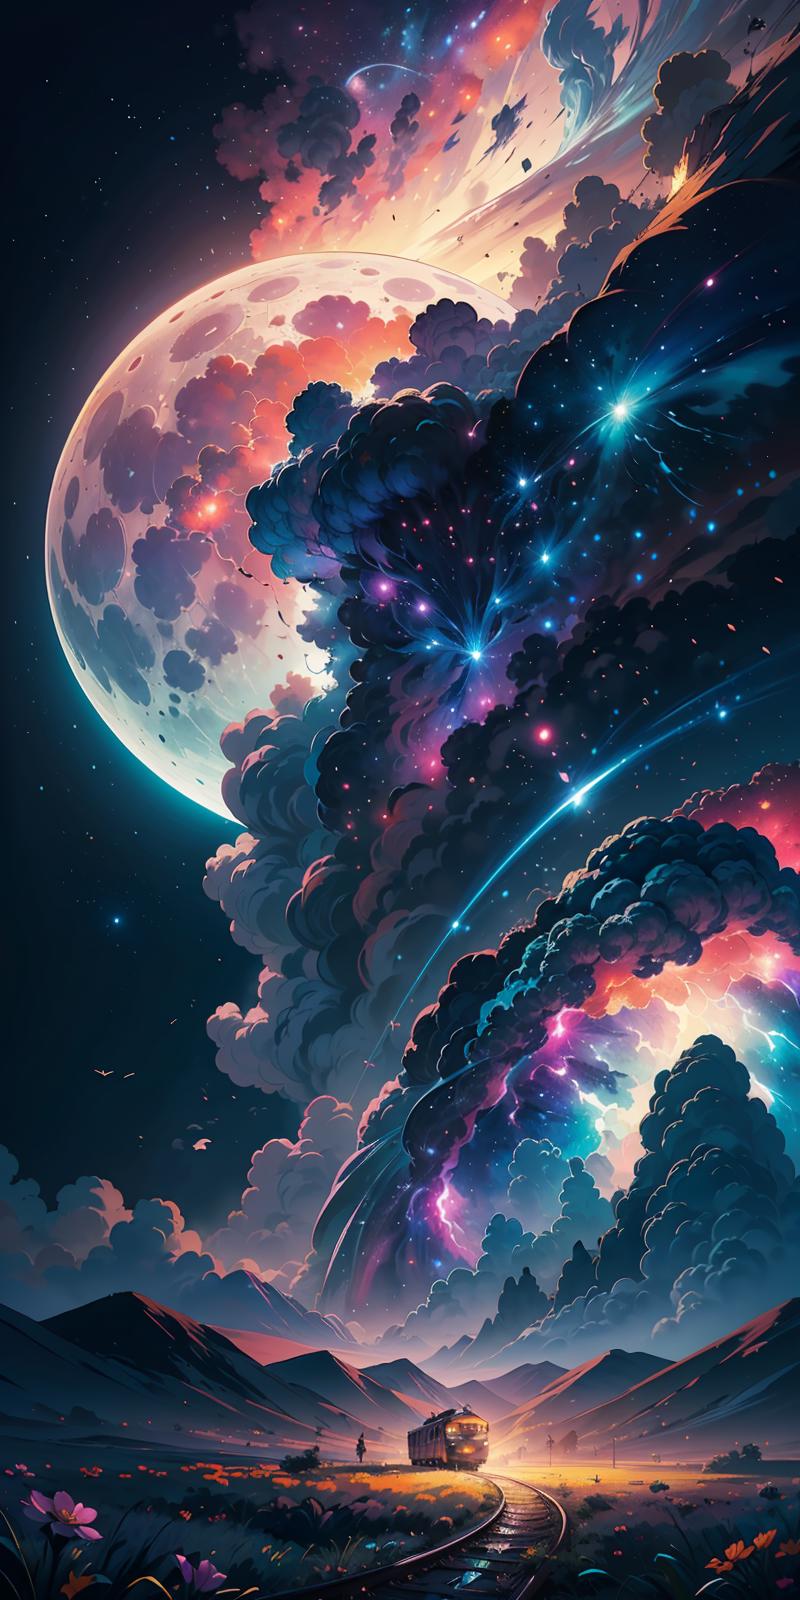 A vibrant and colorful image of a moon and clouds in the night sky.